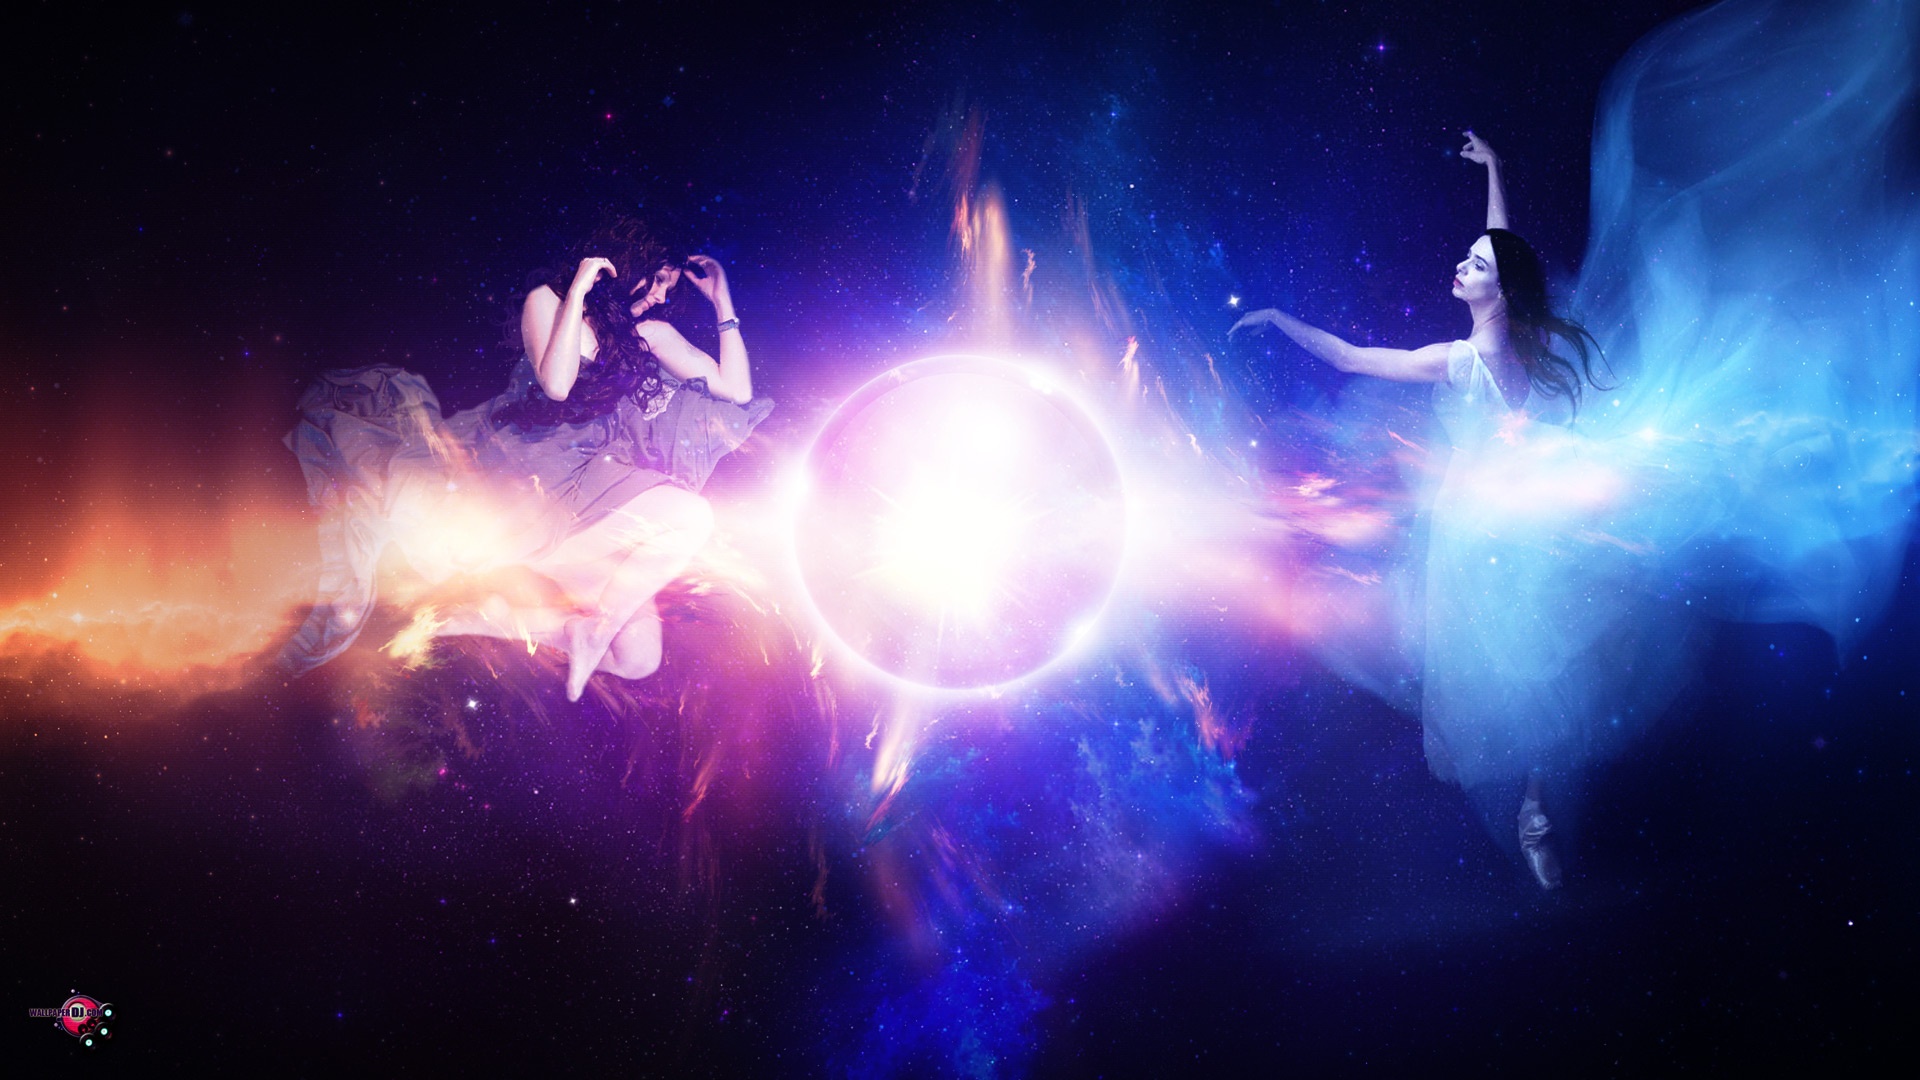  Transcending Dimensions wallpaper music and dance wallpapers 1920x1080